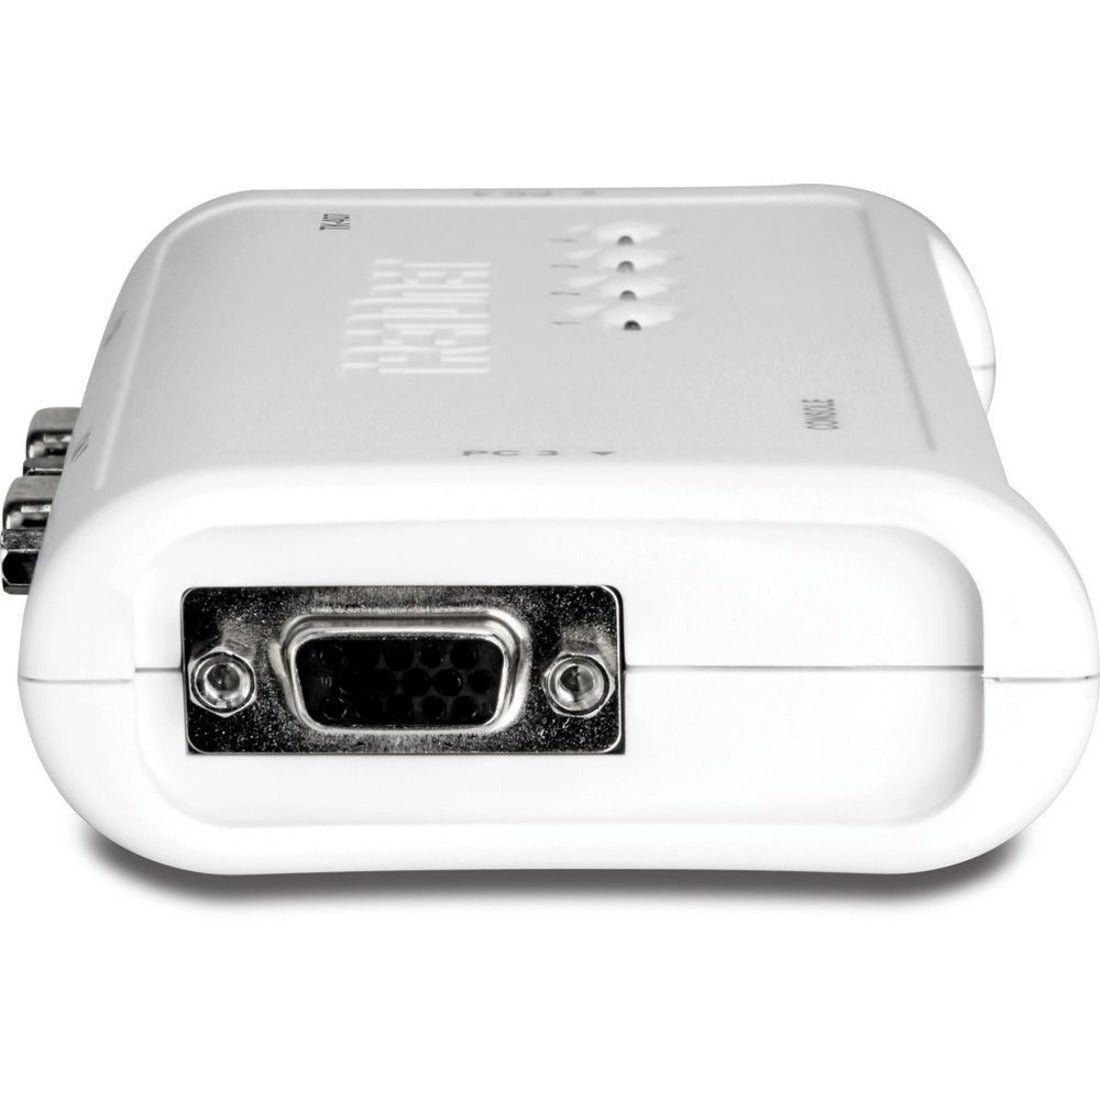 TRENDnet 4-Port USB KVM Switch Kit, VGA And USB Connections, 2048 x 1536 Resolution, Cabling Included, Control Up To 4 Computers, Compliant With Window, Linux, and Mac OS, White, TK-407K (TK-407K) Right image